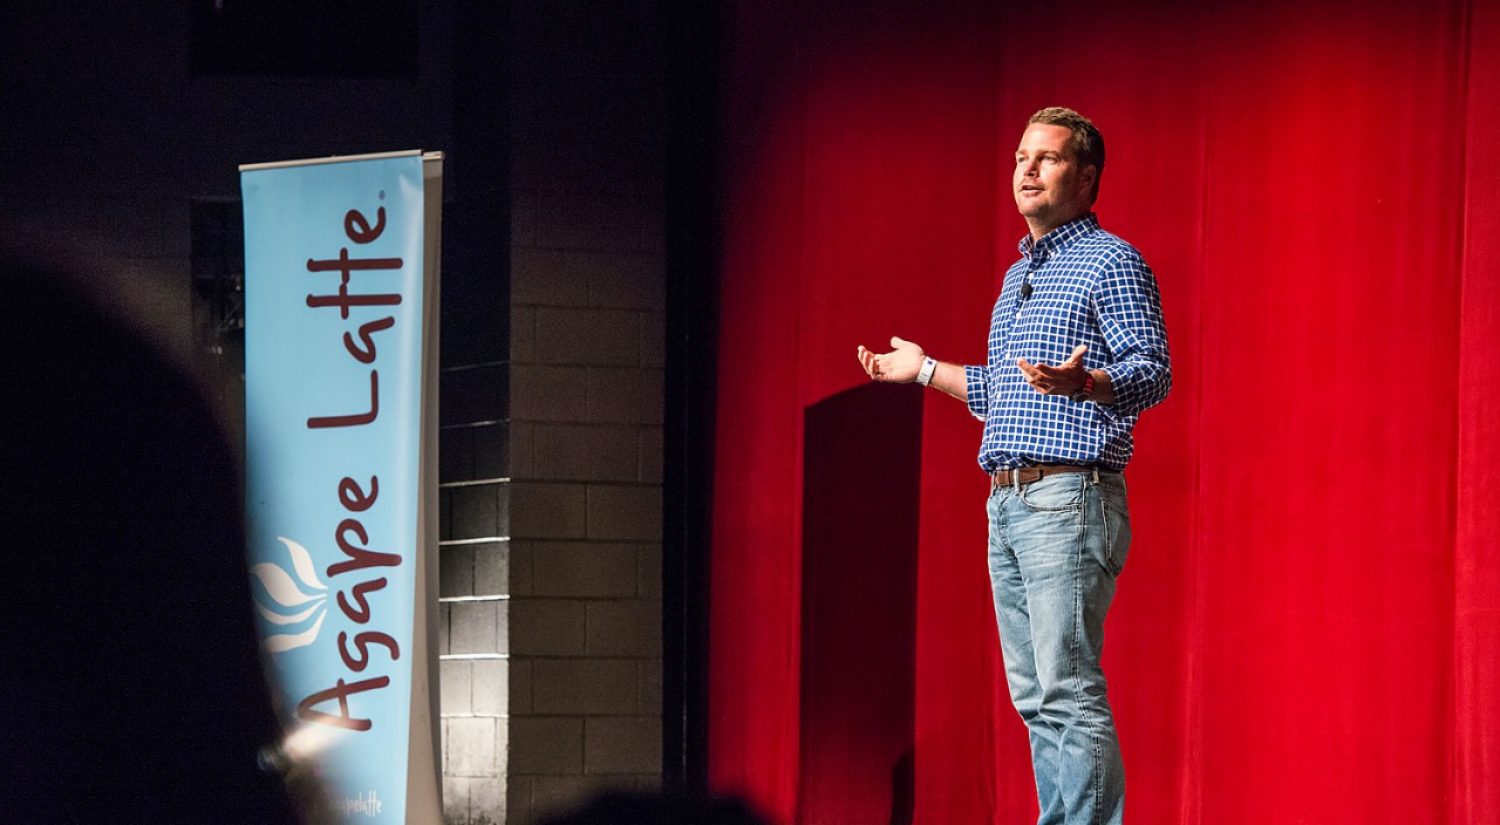 Chris O'Donnell speaking on a stage with an Agape Latte poster